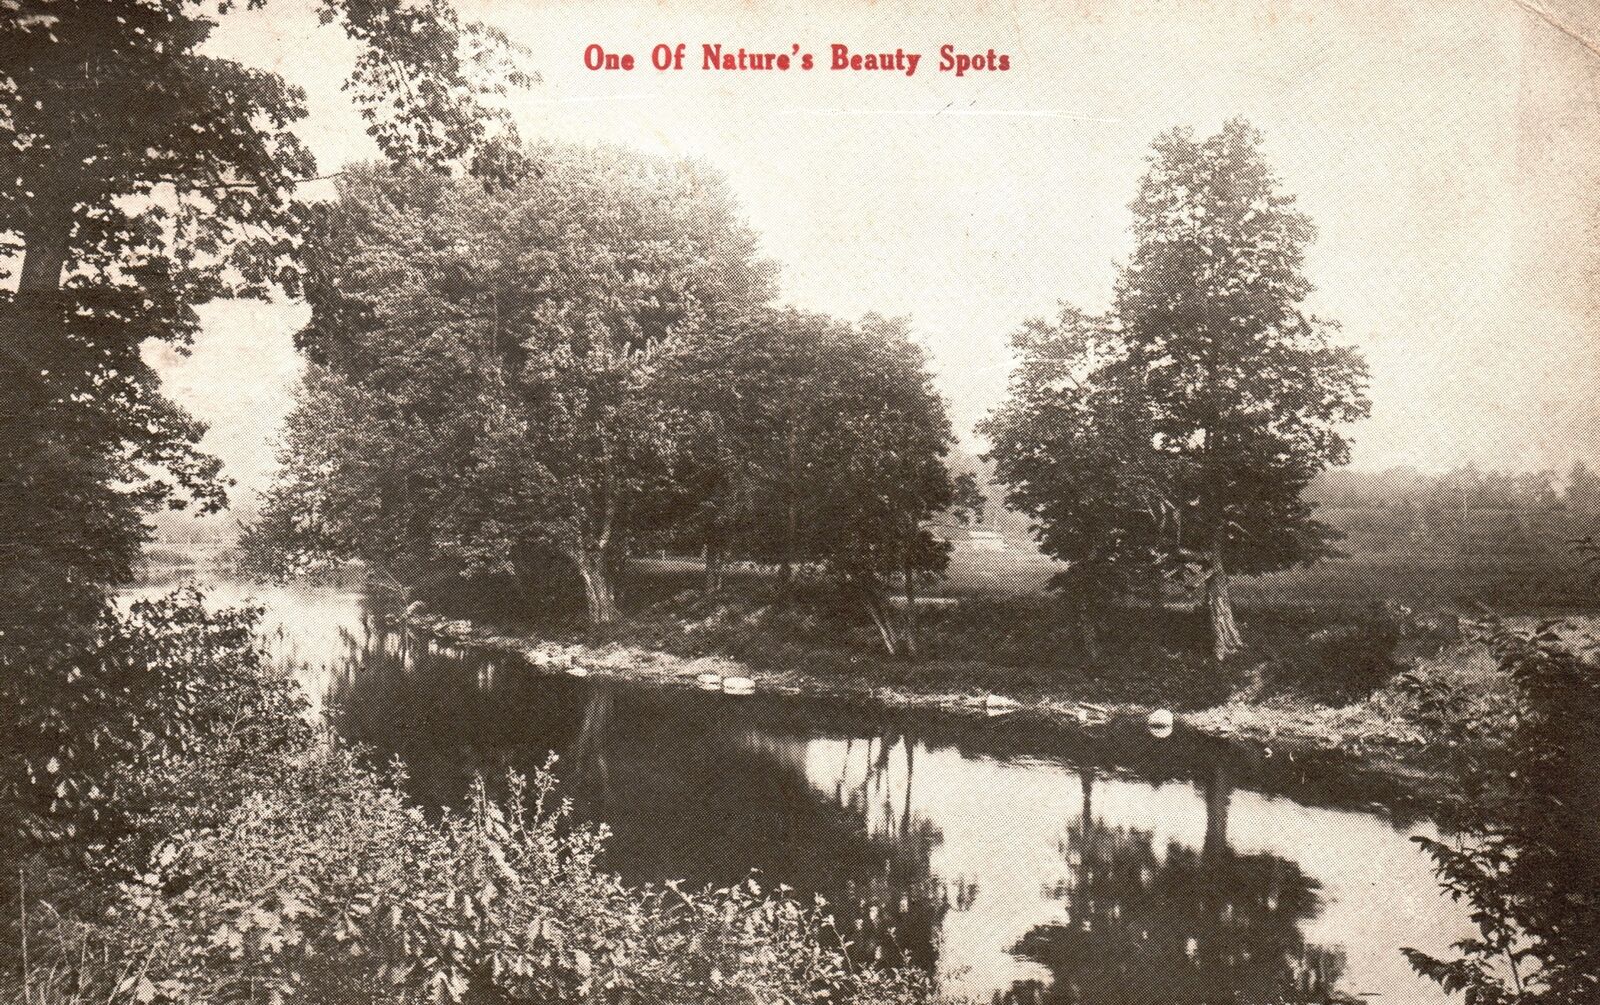 Vintage Postcard 1912 One Of Nature's Beauty Spots Lake Forest Trees Fishing